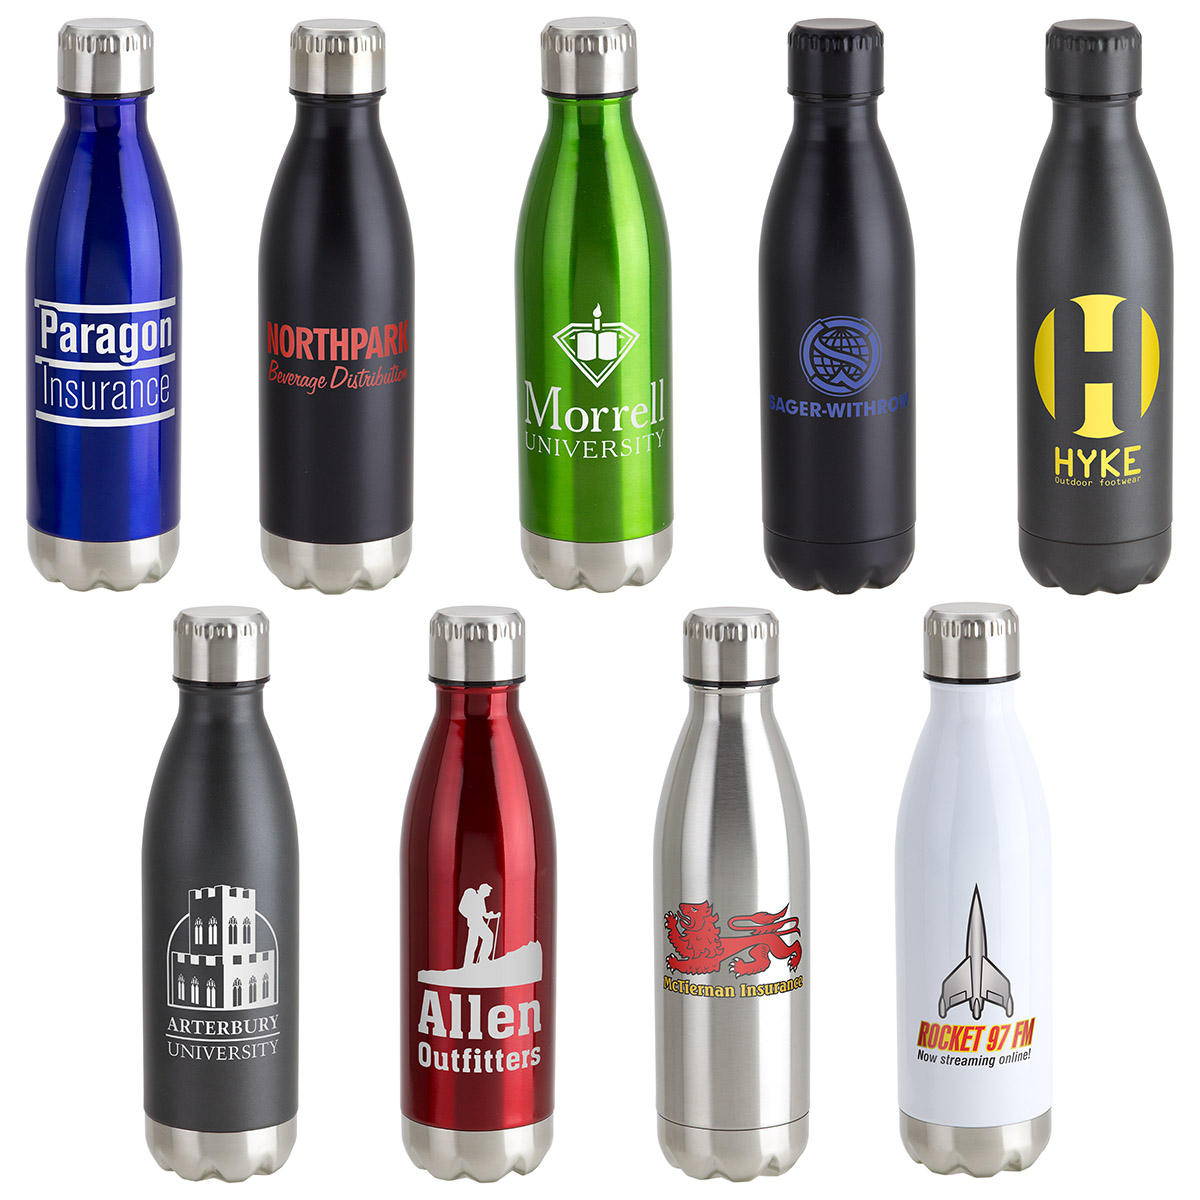 Black Insulated Stainless Steel Water Vacuum Bottle Double-Walled for Outdoor Sports Hiking Running 500ml/17 oz